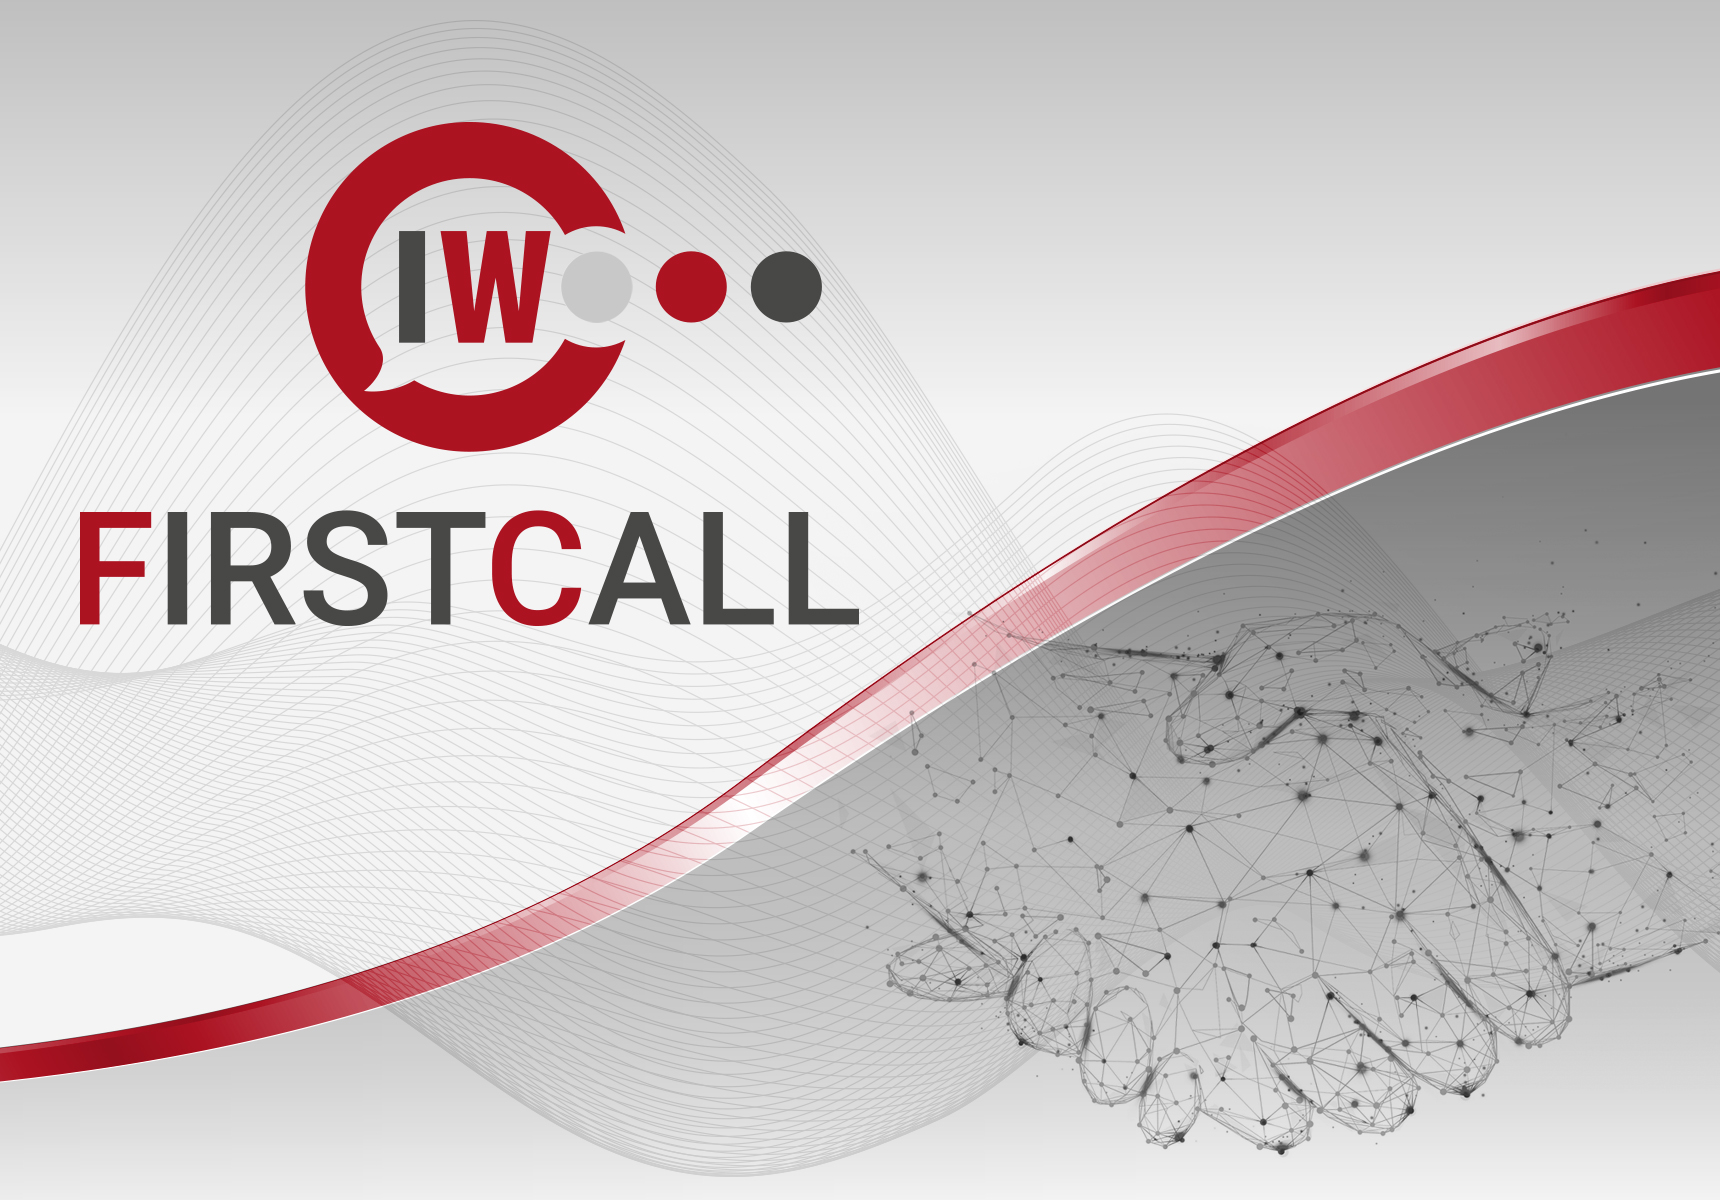 Global Help Desk Transforms into ⋮IWFirstCall: A New Era for the Customer Care Center After Successful Acquisition